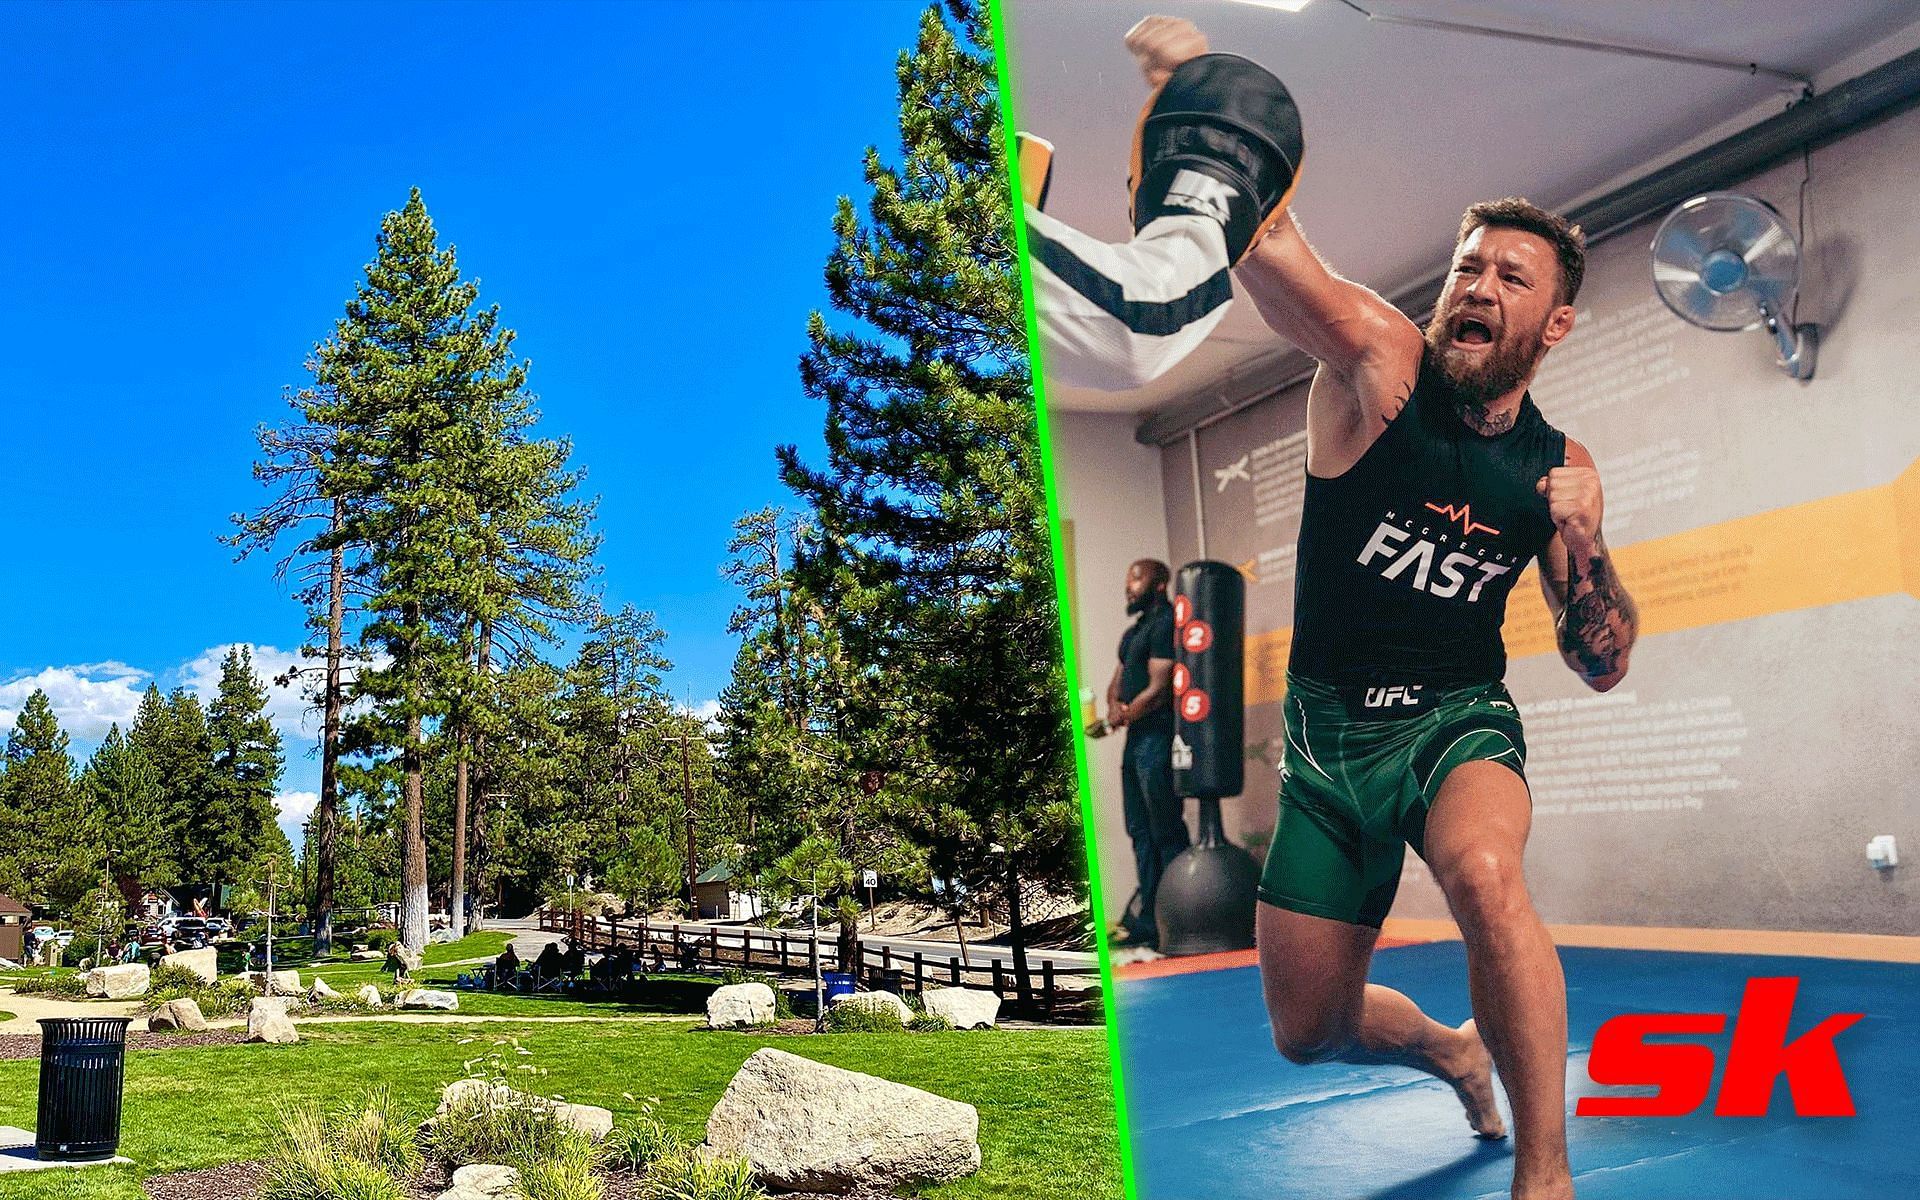 Big Bear Lake City (left) and Conor McGregor (right) [Image Credits: @thenotoriousmma on Instagram and @JovitaPorcayo on Twitter]